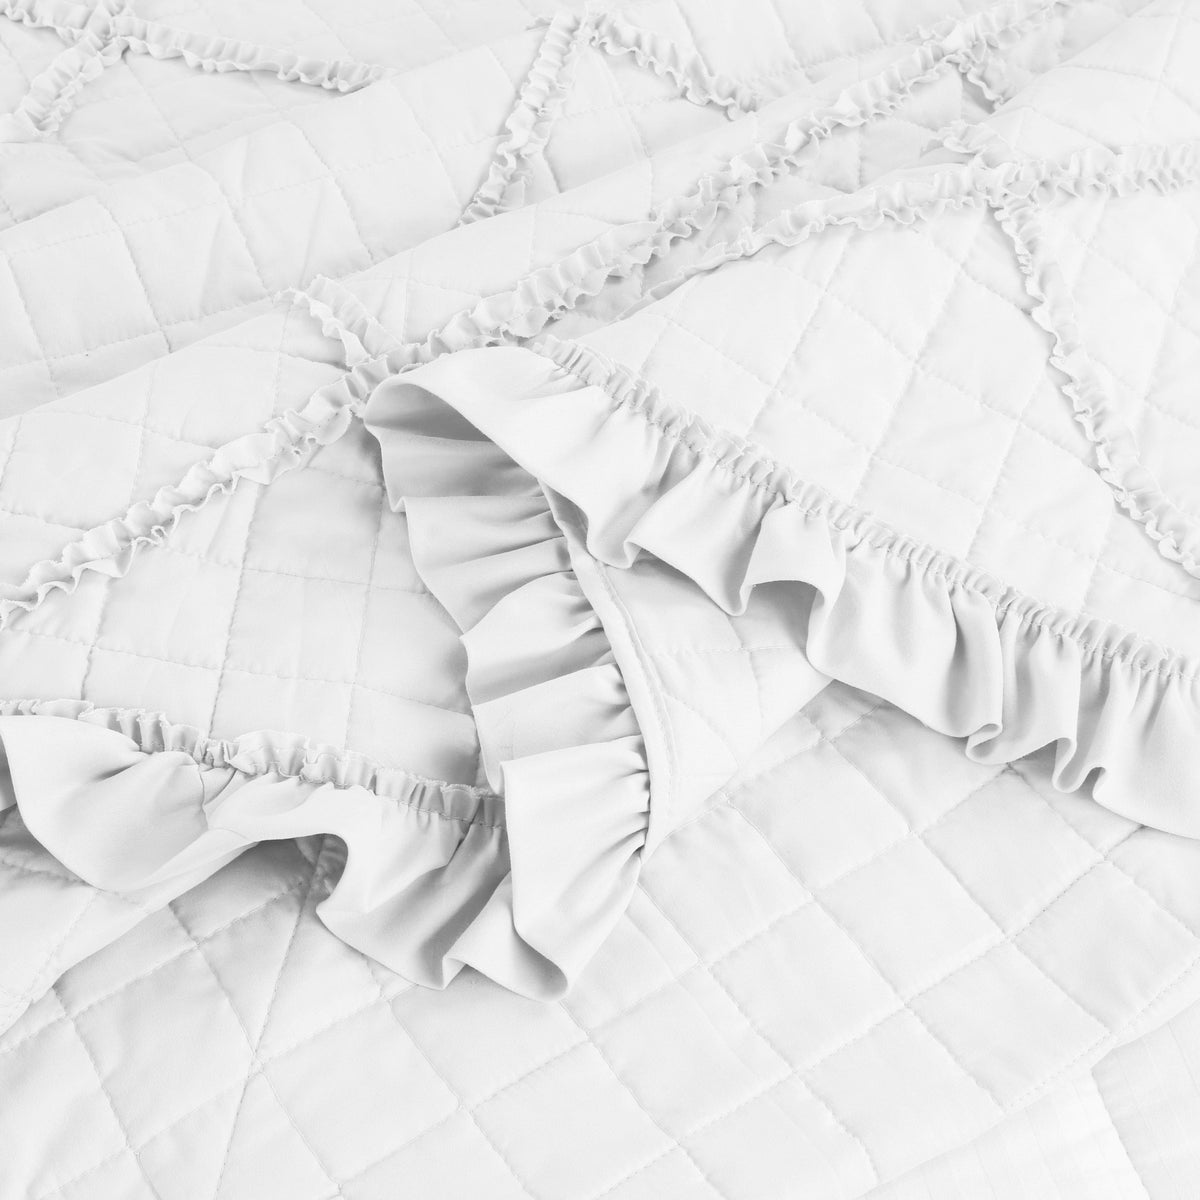 Lush Ruffled Textured Shabby Chic Embroidered Stitching Coverlet Bedspread Ultra Soft Solid 3 Piece Summer Quilt Set with 2 Quilted Shams, White